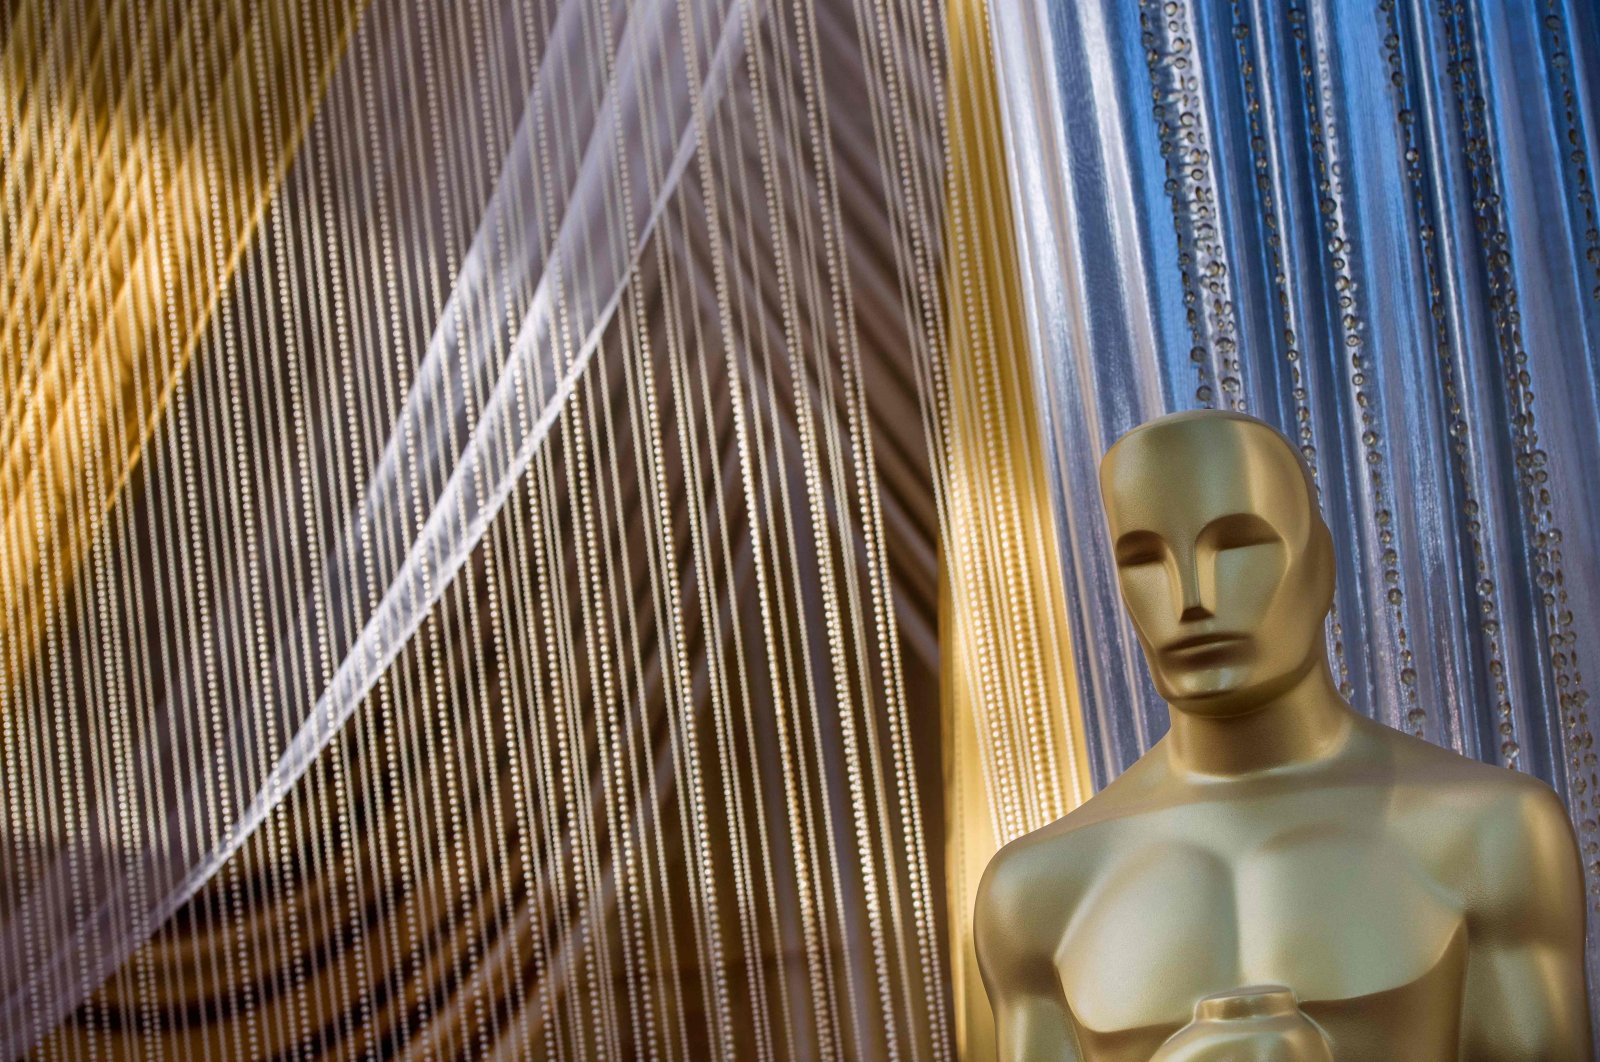 An Oscars statue is displayed on the red carpet area on the eve of the 92nd Oscars ceremony at the Dolby Theater in Hollywood, California, U.S., Feb. 8, 2020. (AFP)